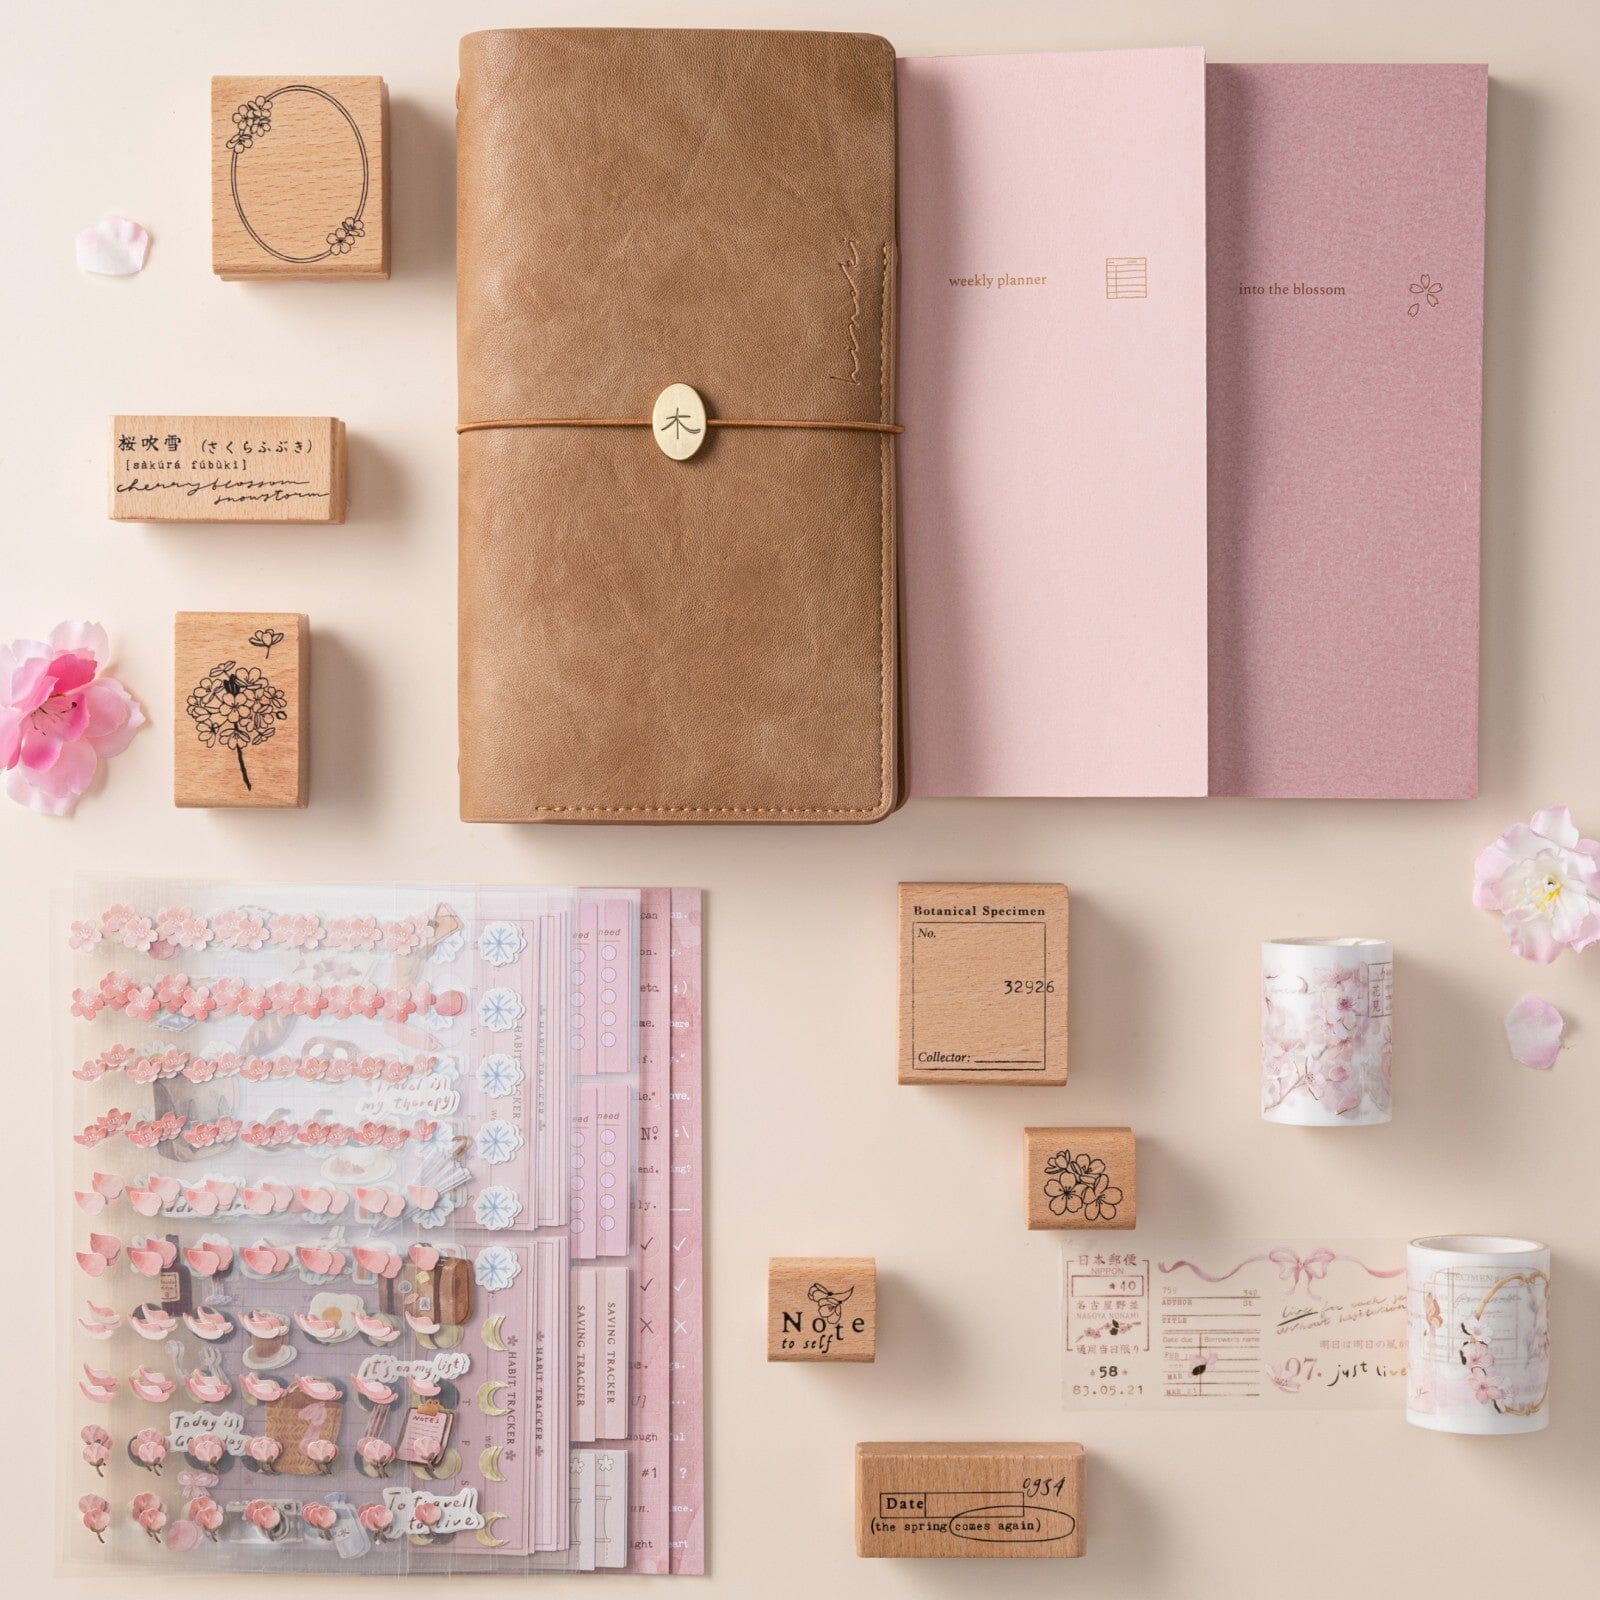 Hinoki - ‘Into the Blossom’ Wooden Stamps Set